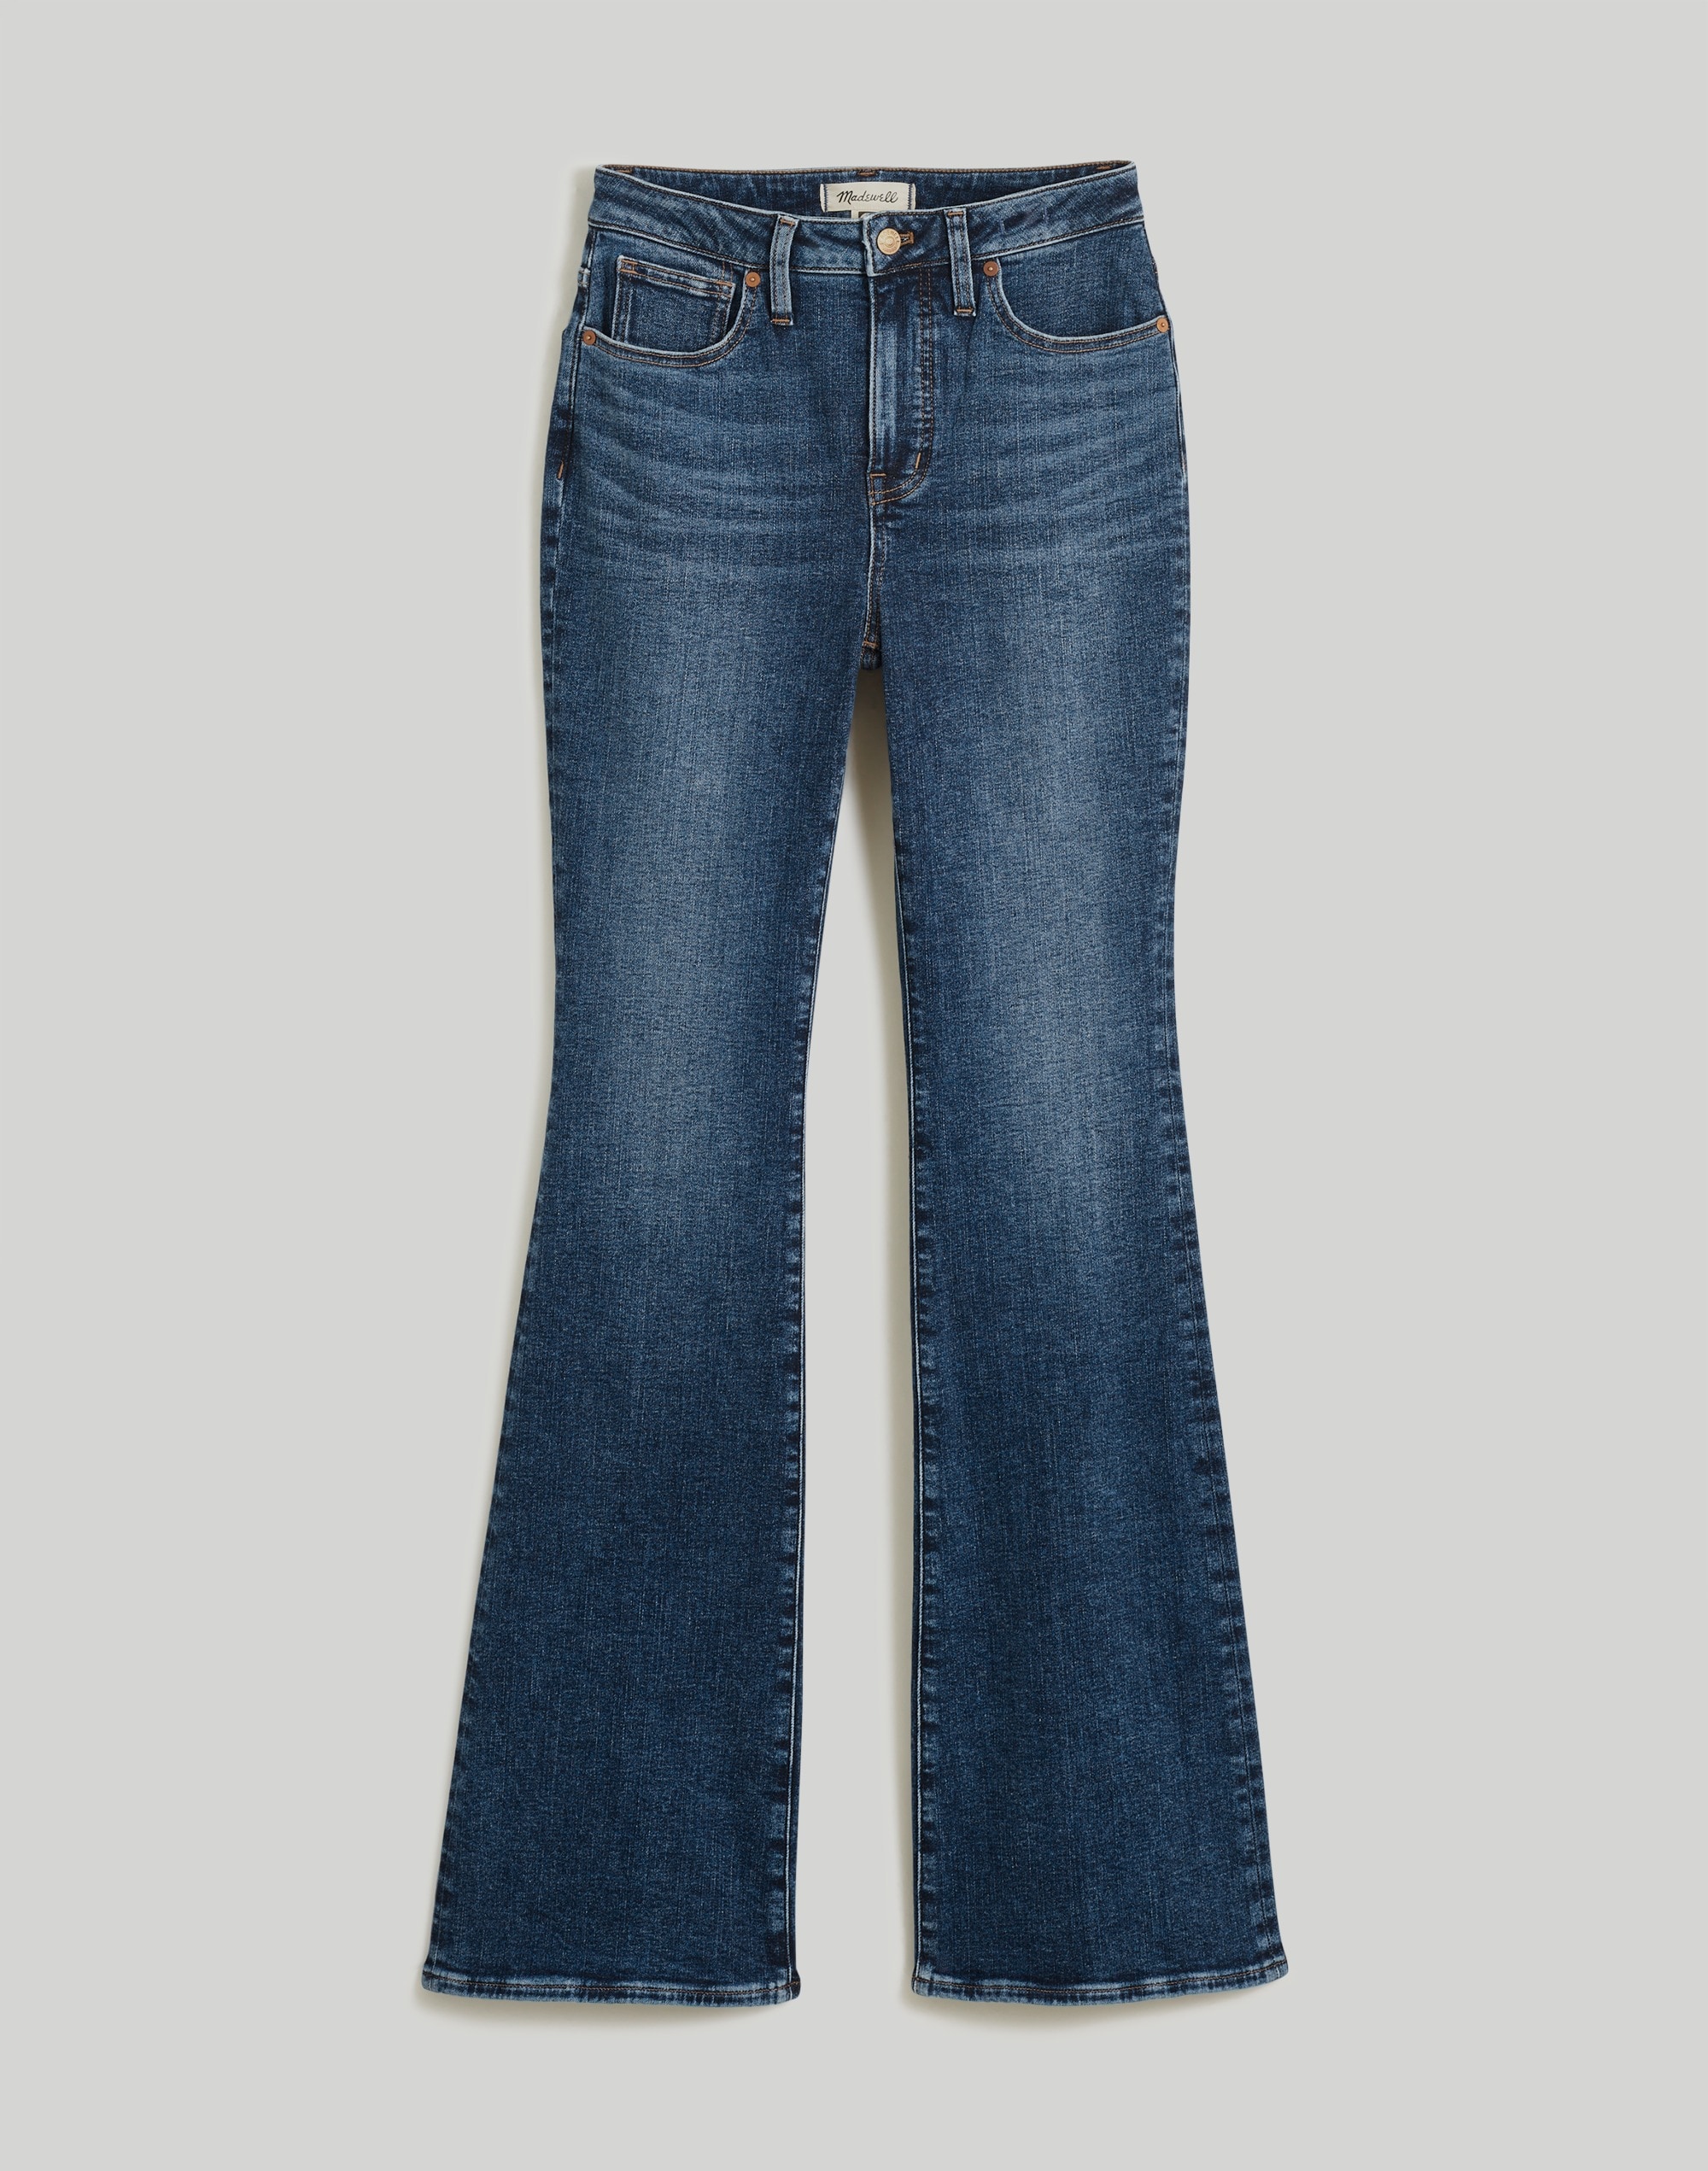 Skinny Flare Jeans in Alvord Wash: Instacozy Edition | Madewell